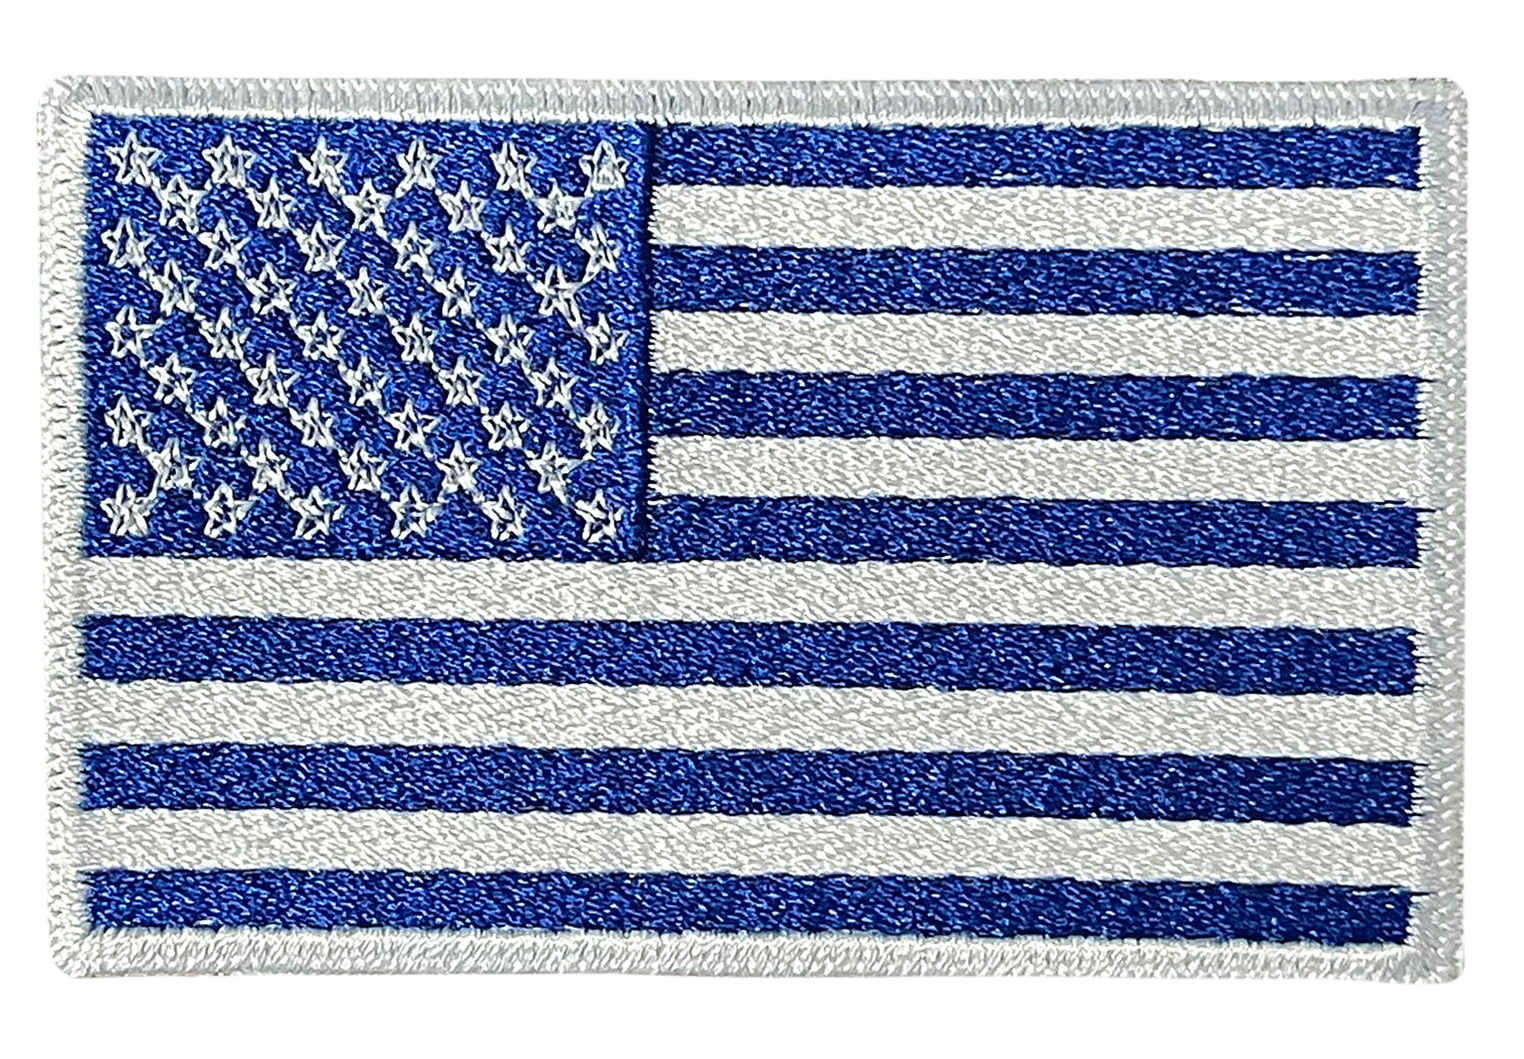 A blue and white american flag patch on a white background.